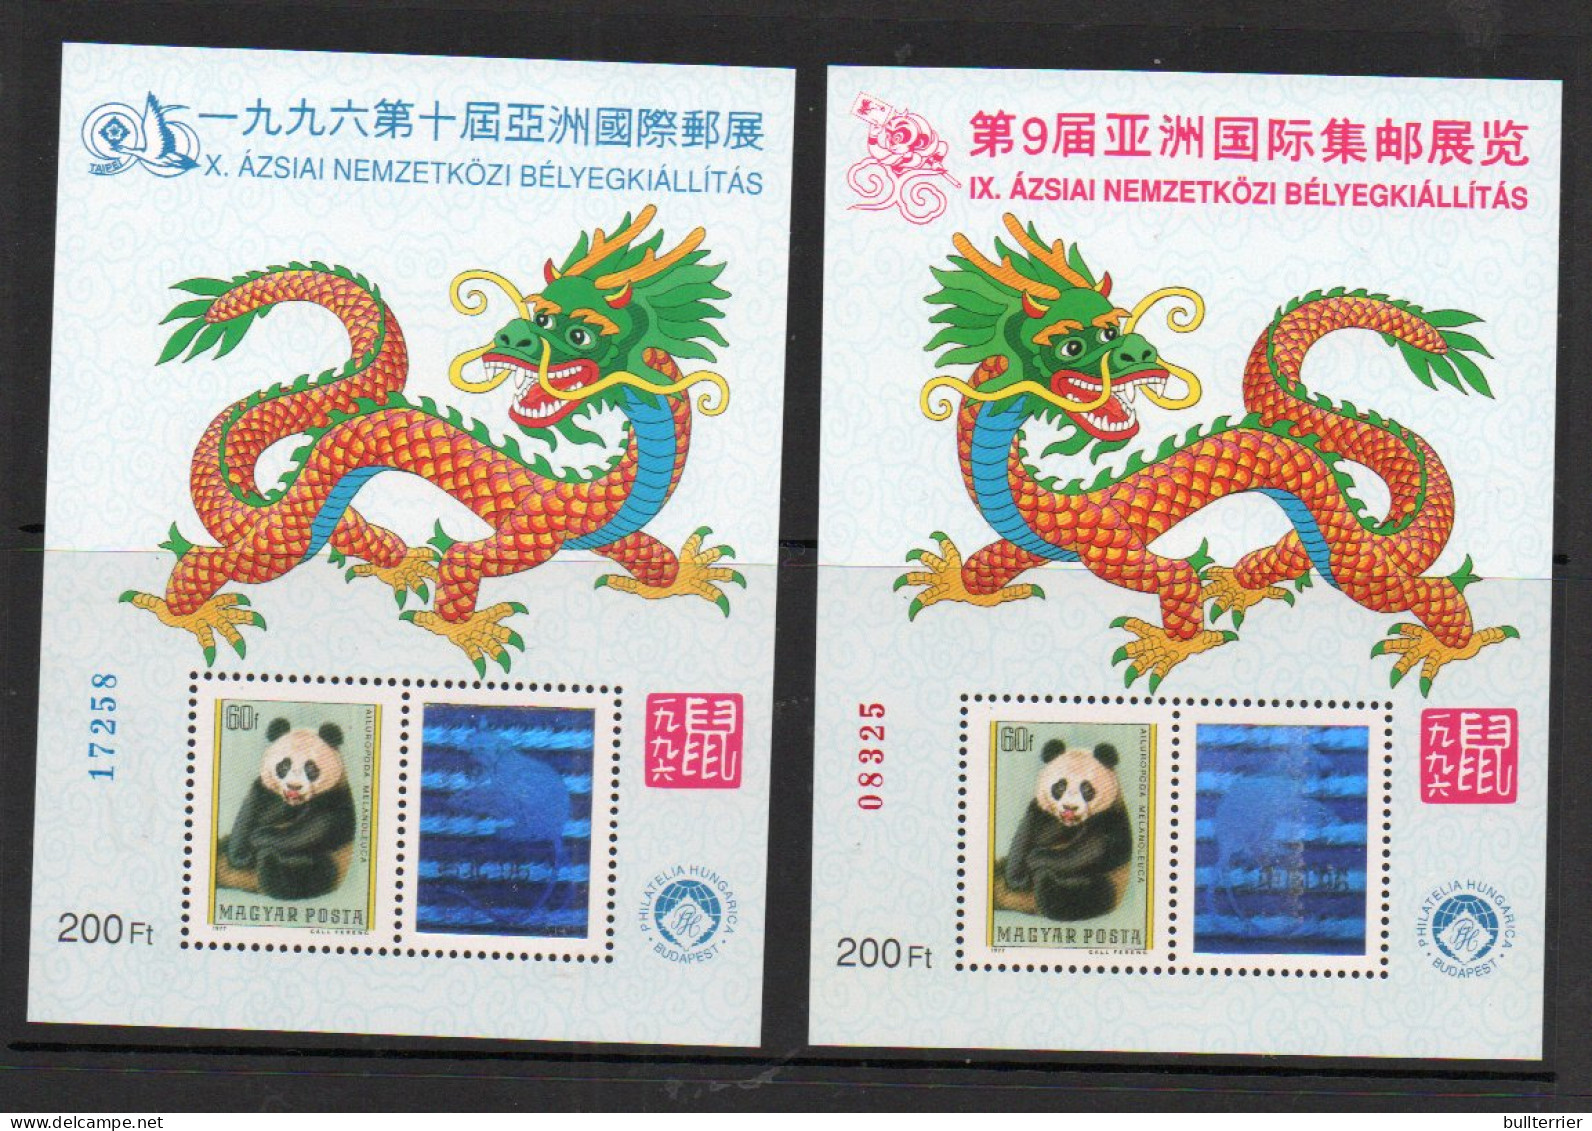 HOLOGRAMS - HUNGARY - TAIPEI /YEAR OF DRAGON /  HOLOGRAM S/SHEETS  MINT NEVER HINGED,  - Ologrammi